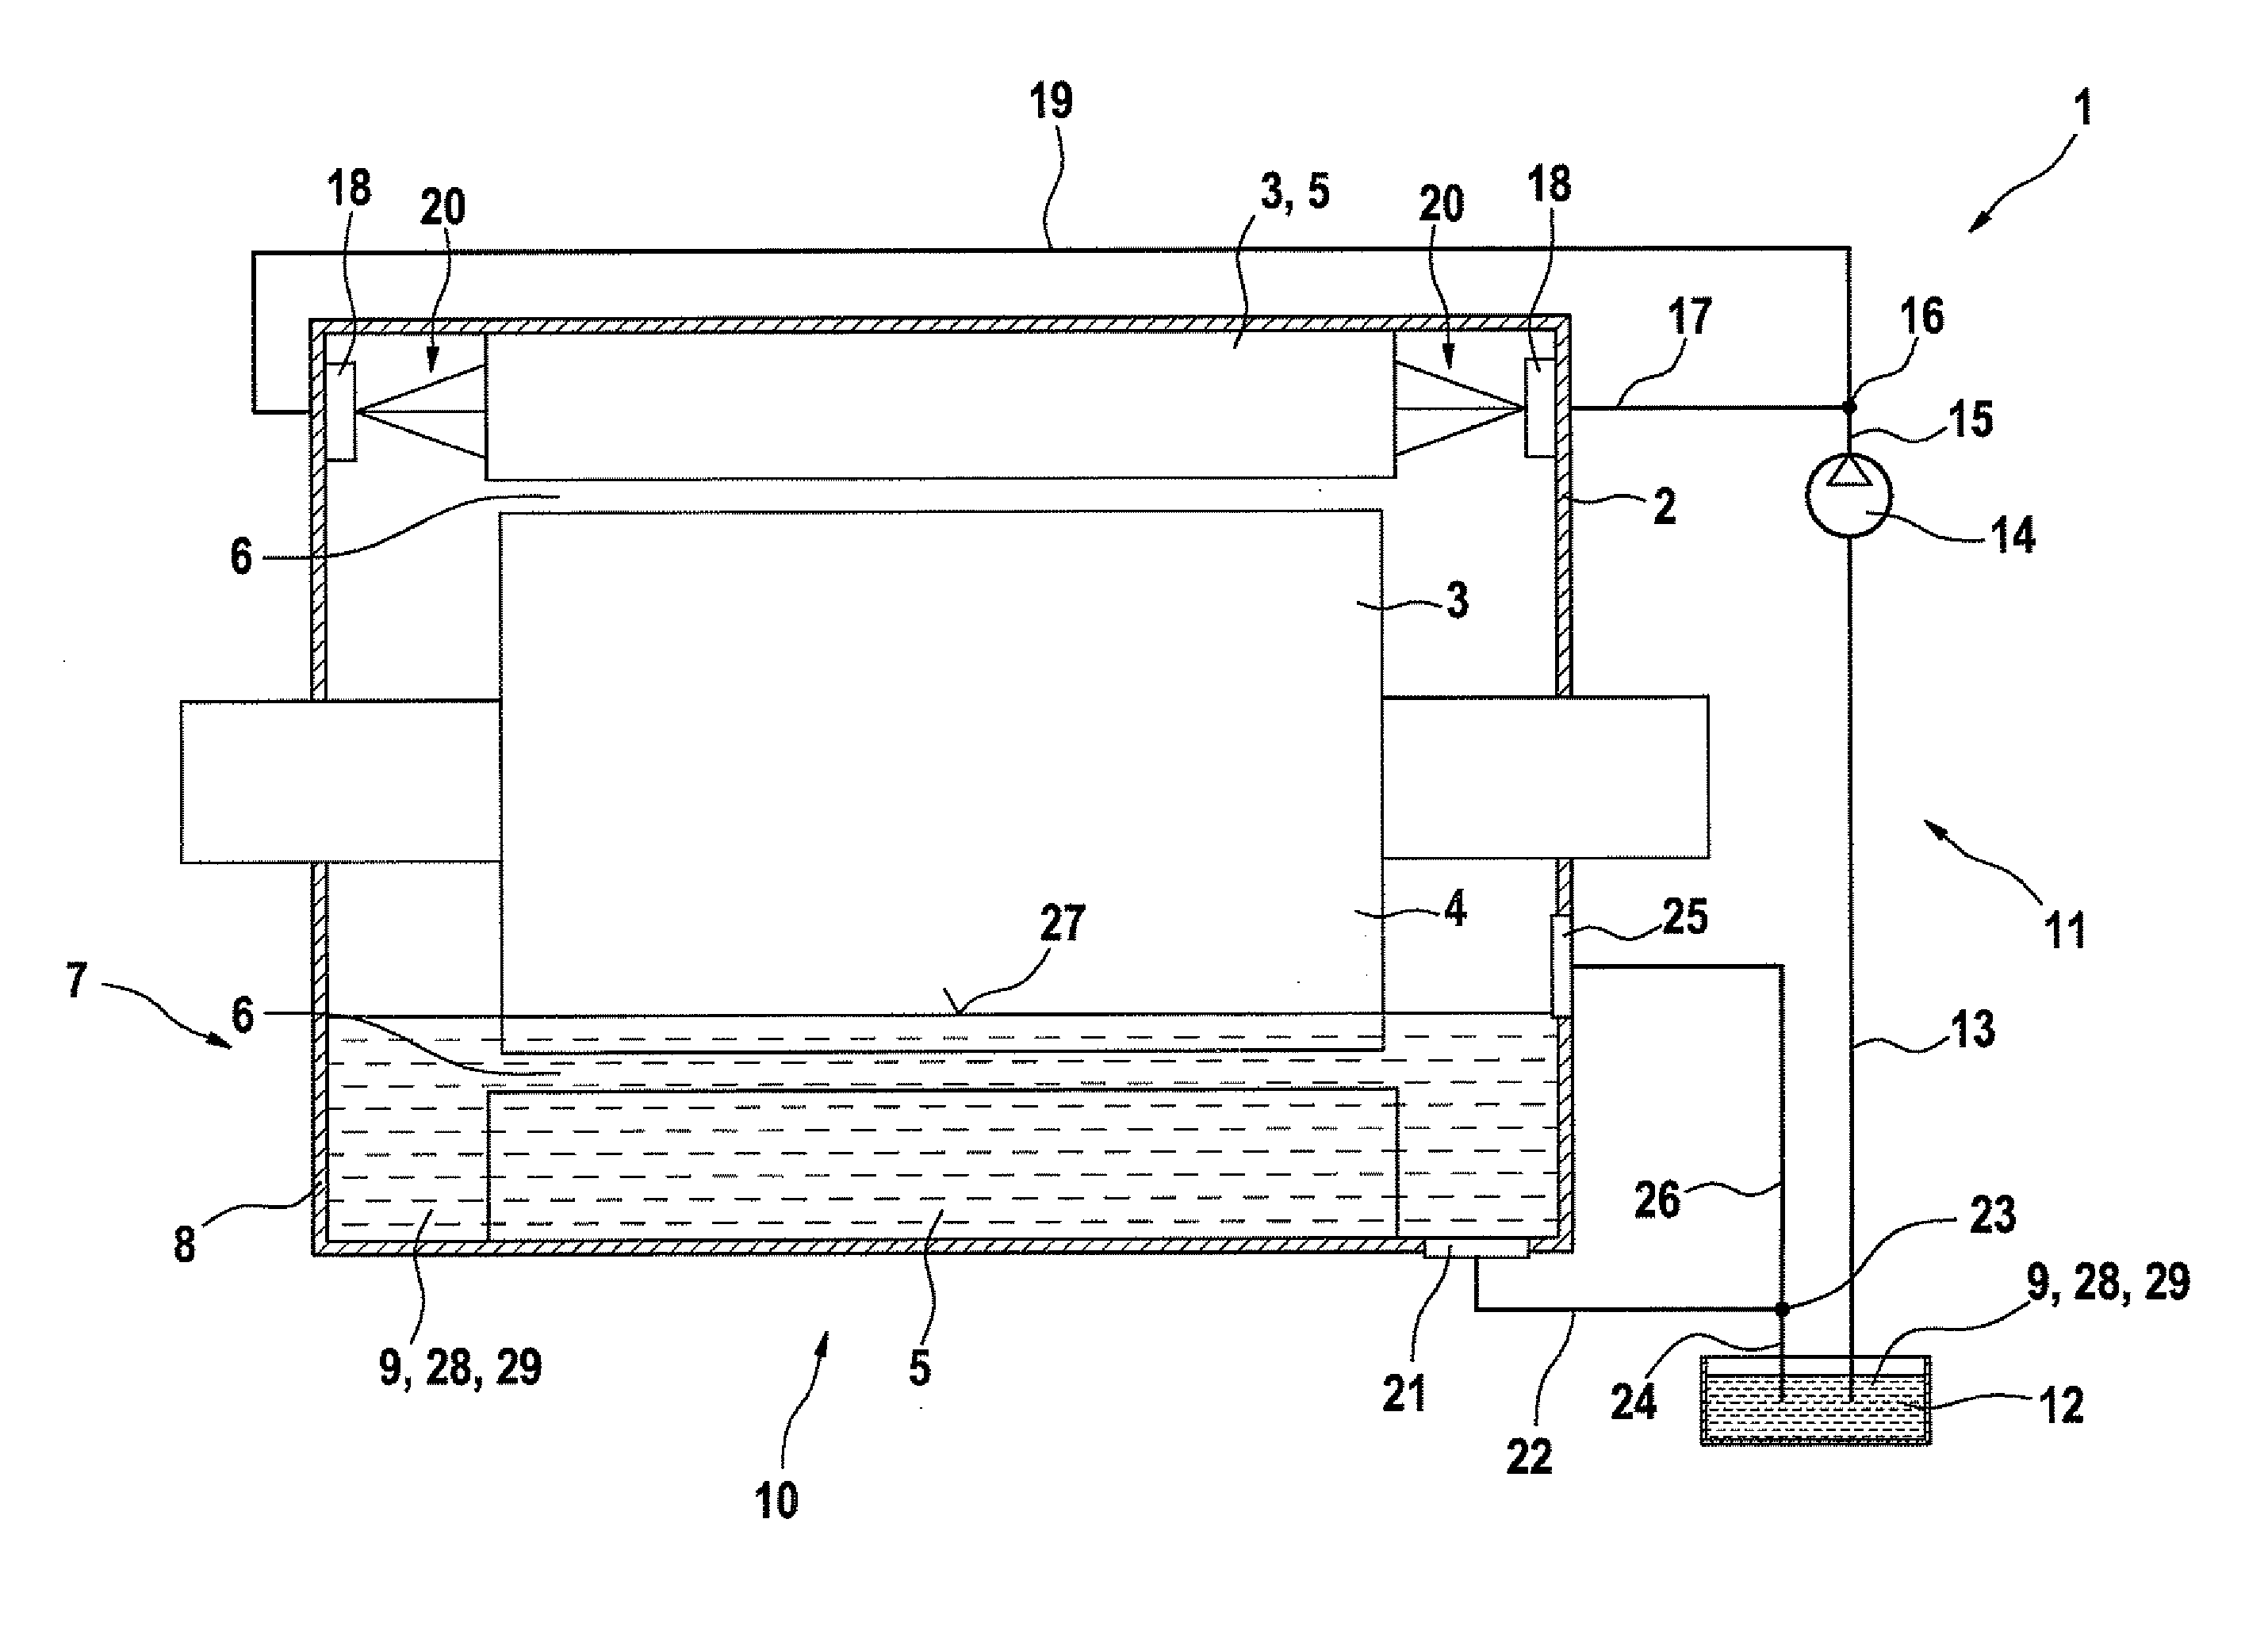 Electric machine having spray and sump cooling